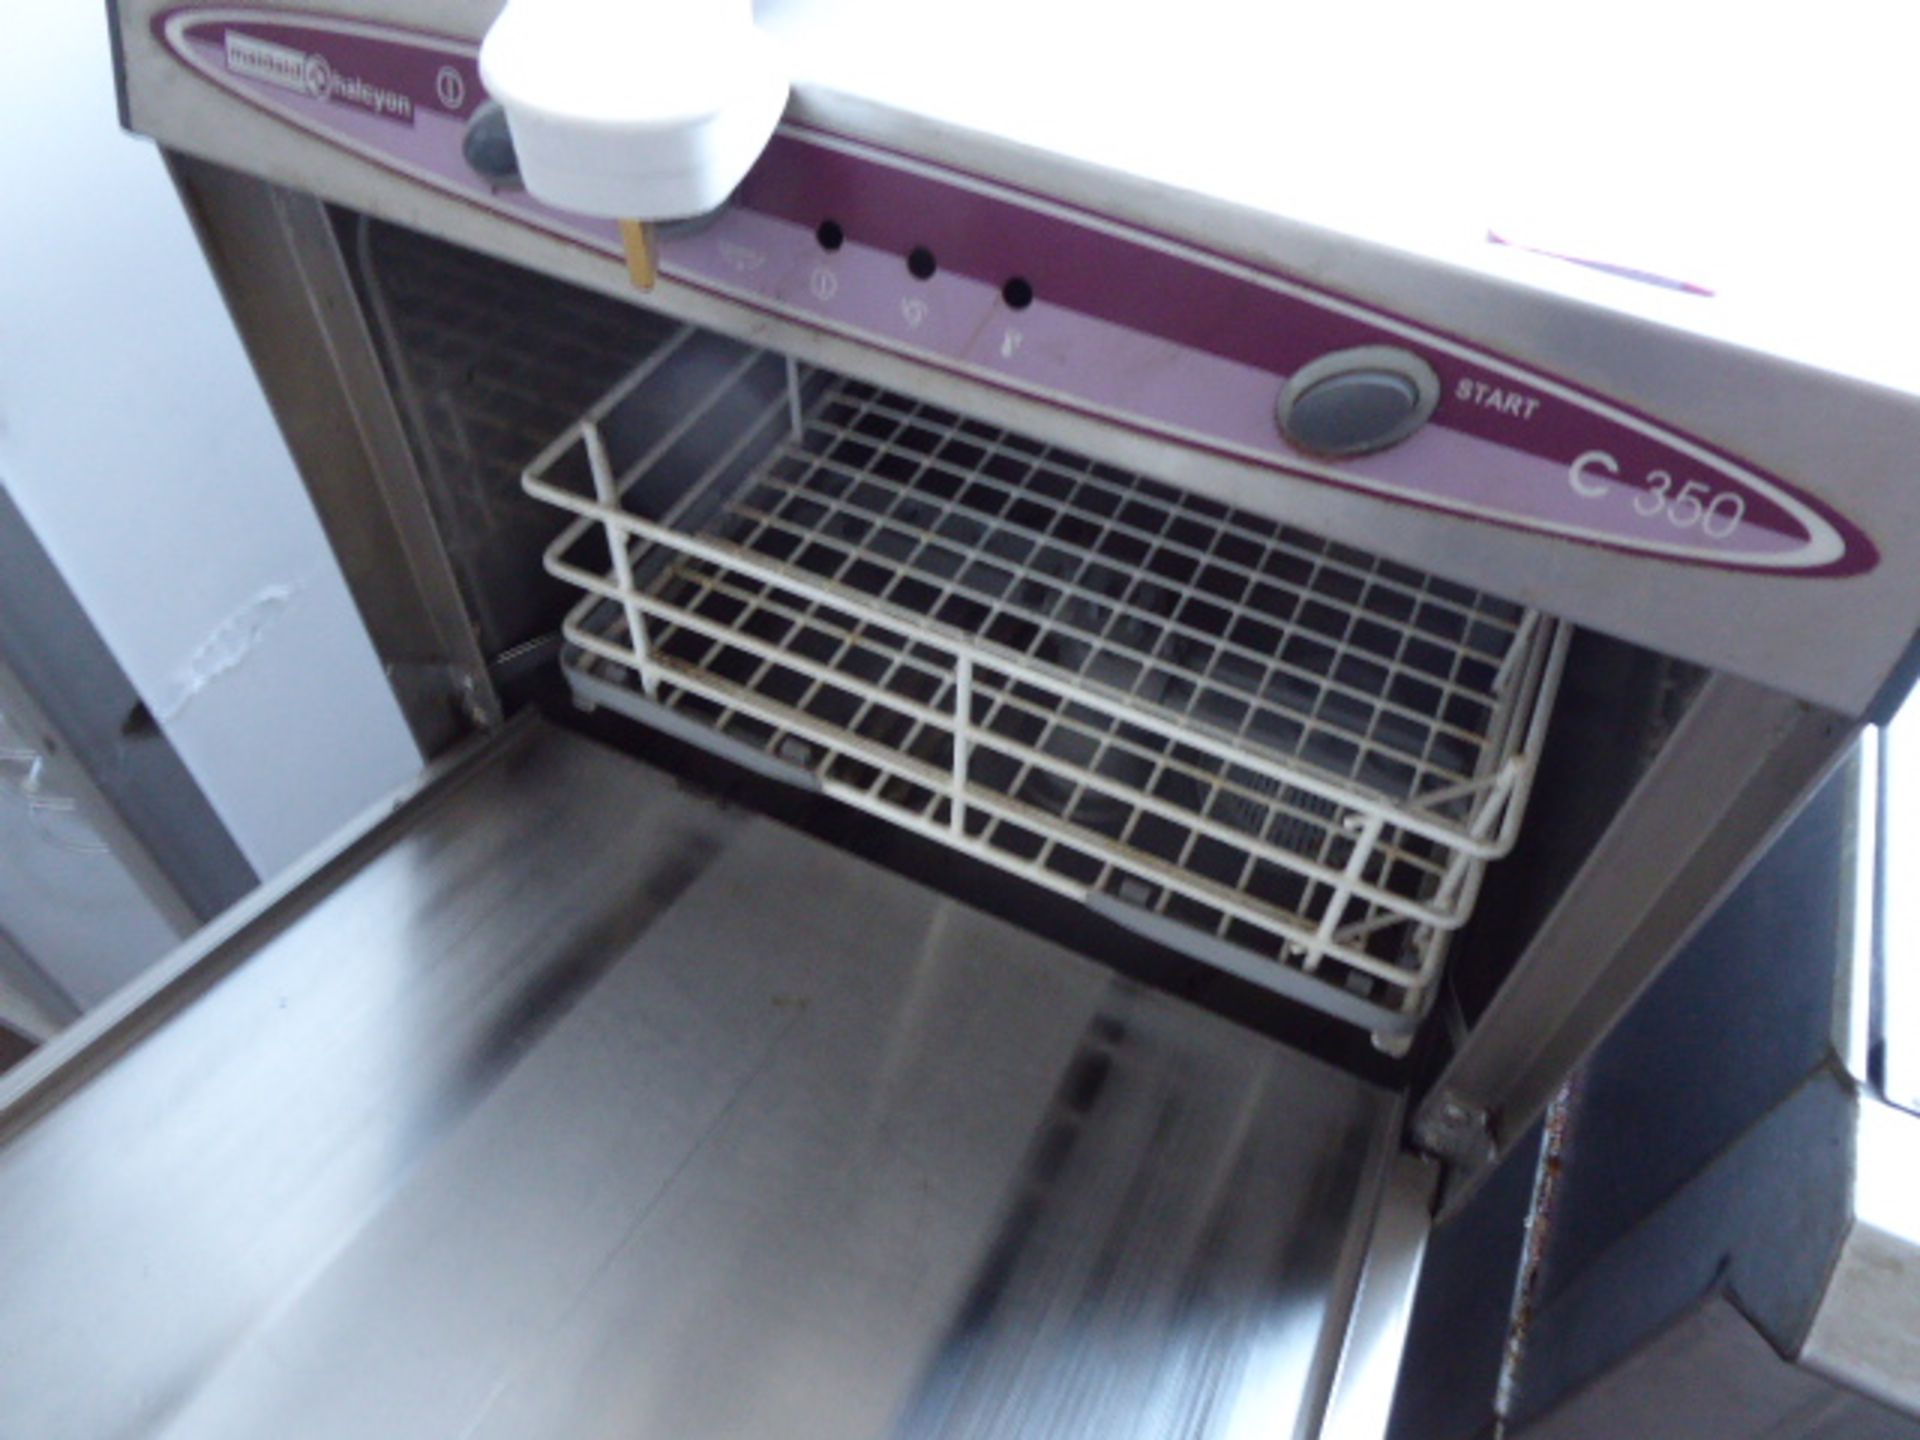 (FAIL) 40cm MaidAid Halcyon C350 glass washer with stand - Image 2 of 2